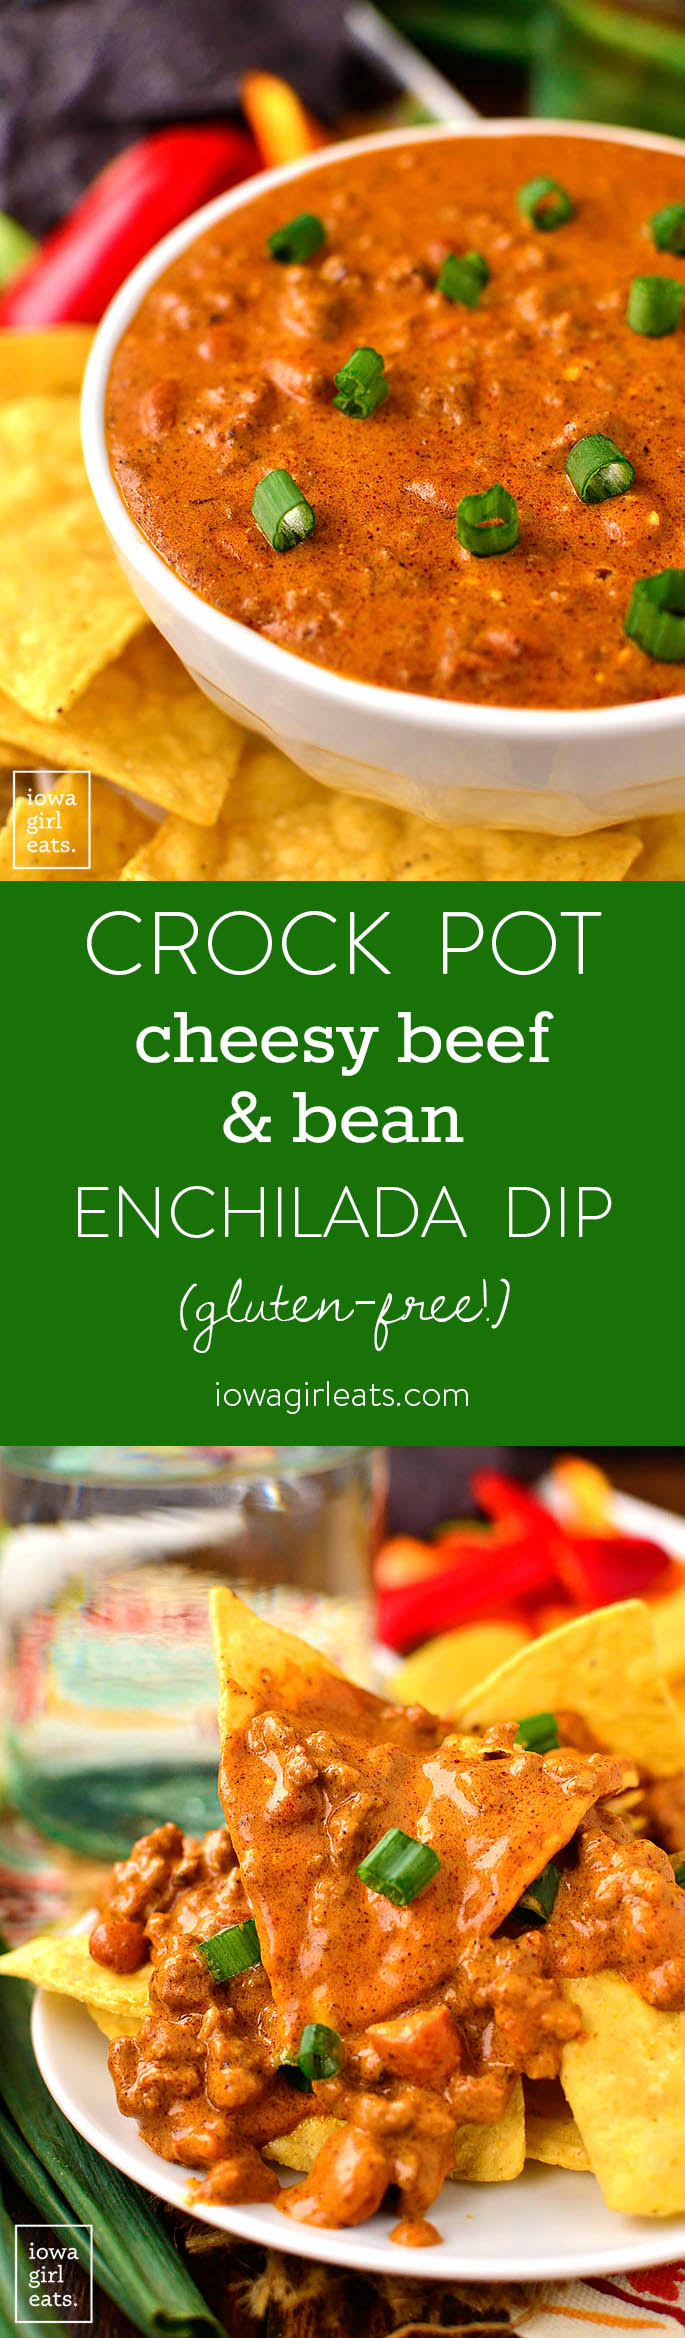 Crock Pot Cheesy Beef and Bean Enchilada Dip is a delectable gluten-free dip that's cheesy and savory. Perfect for game day or parties! | iowagirleats.com